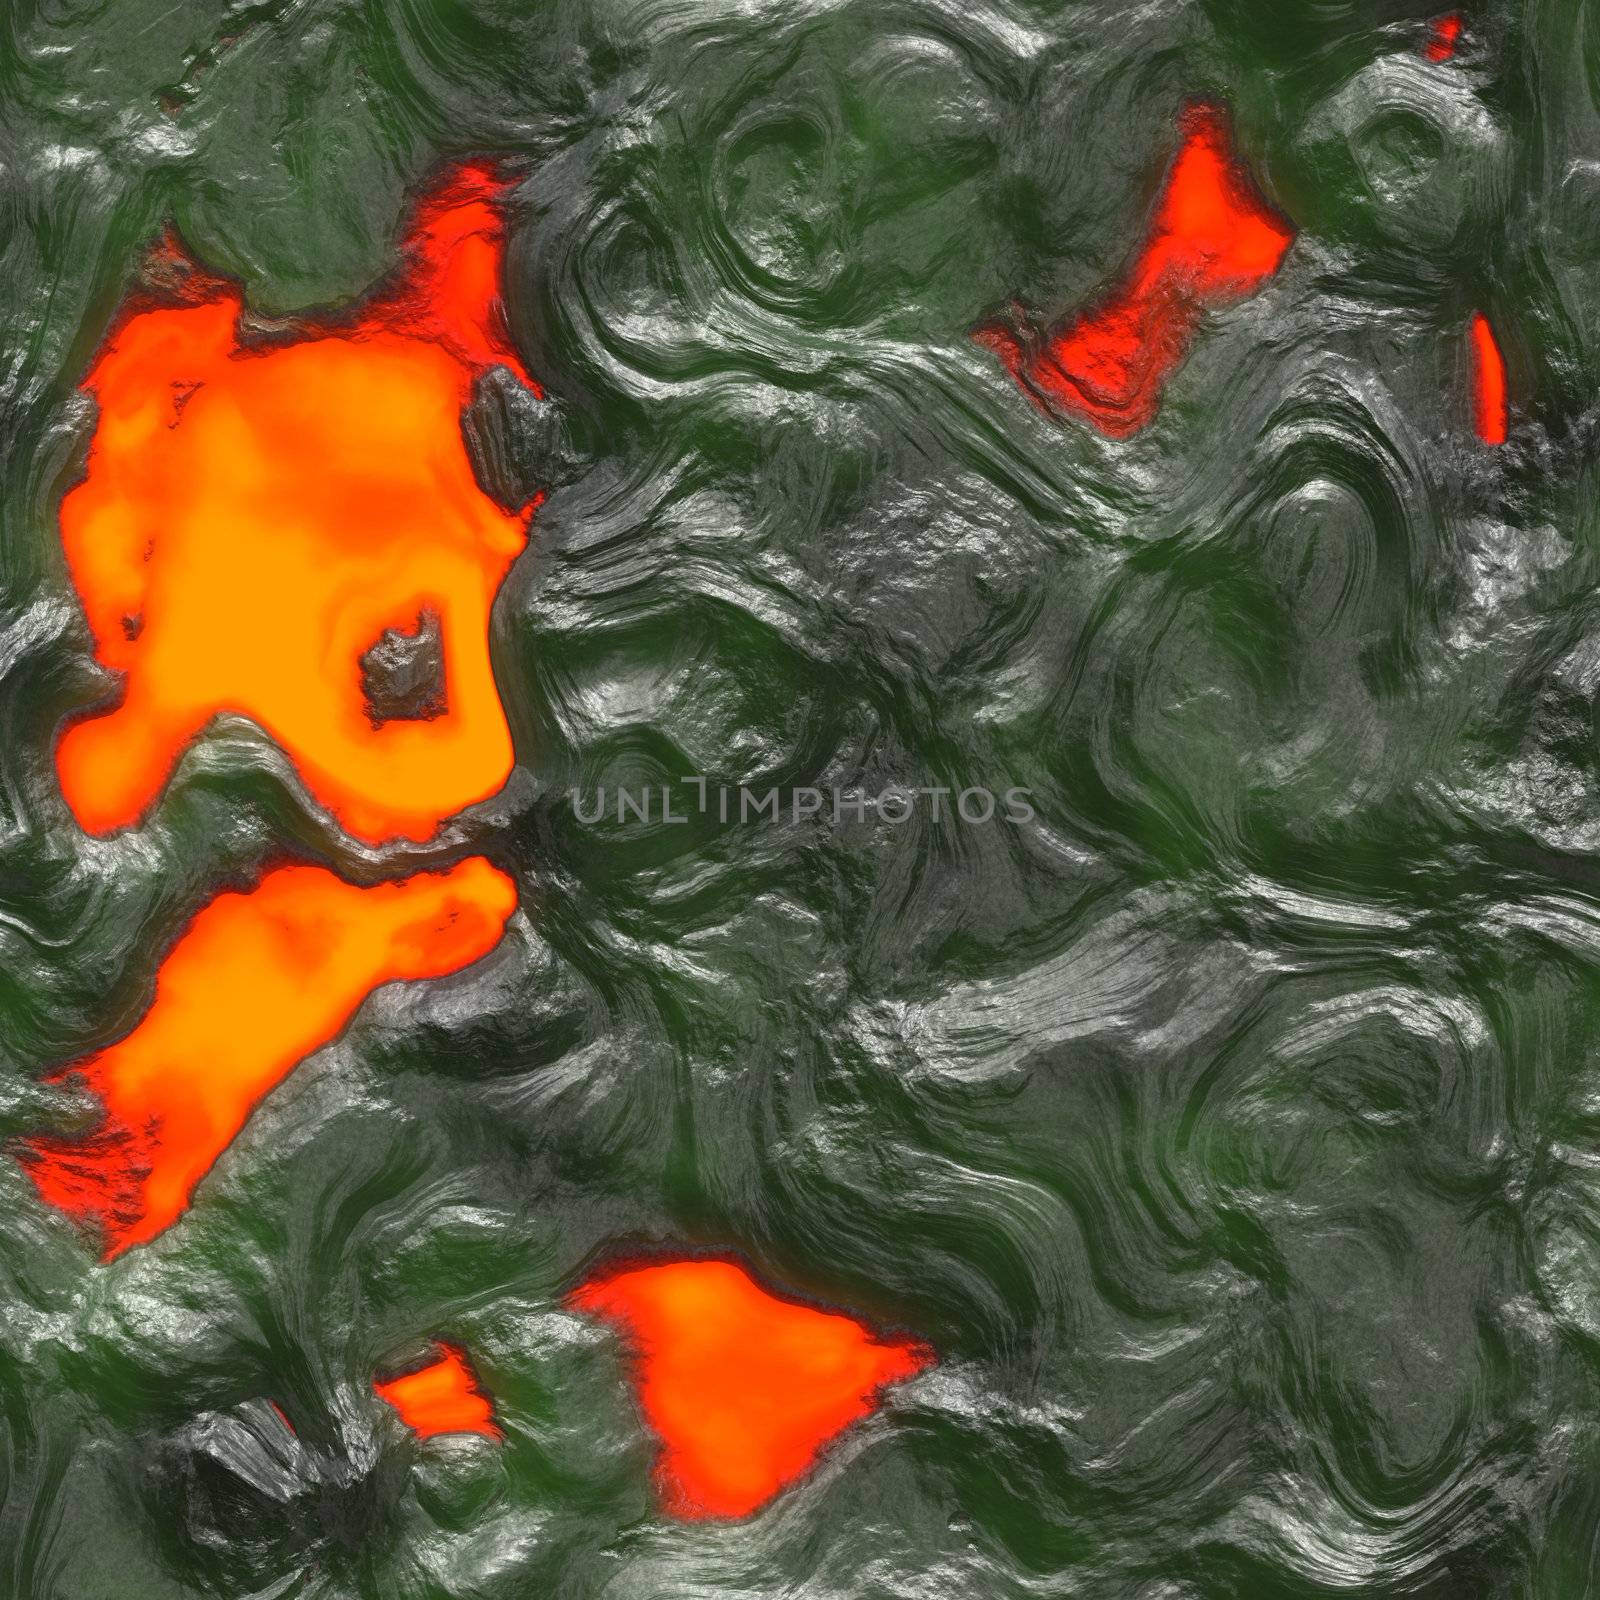 Here is a seamless active magma background